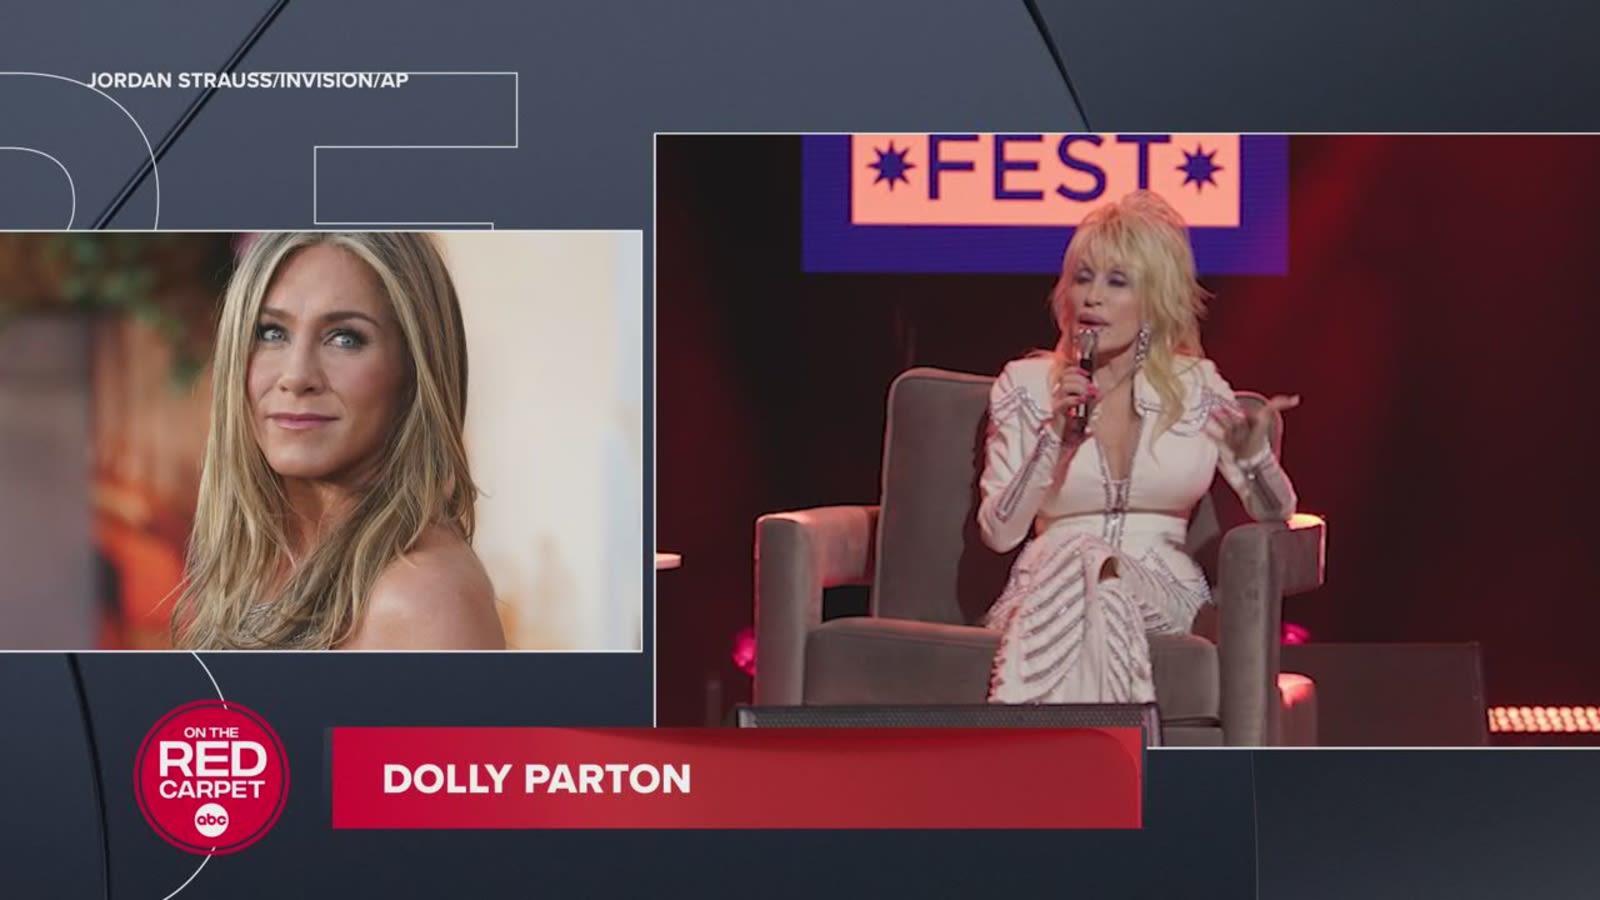 Dolly Parton wants to be a part of Jennifer Aniston's '9 to 5' remake